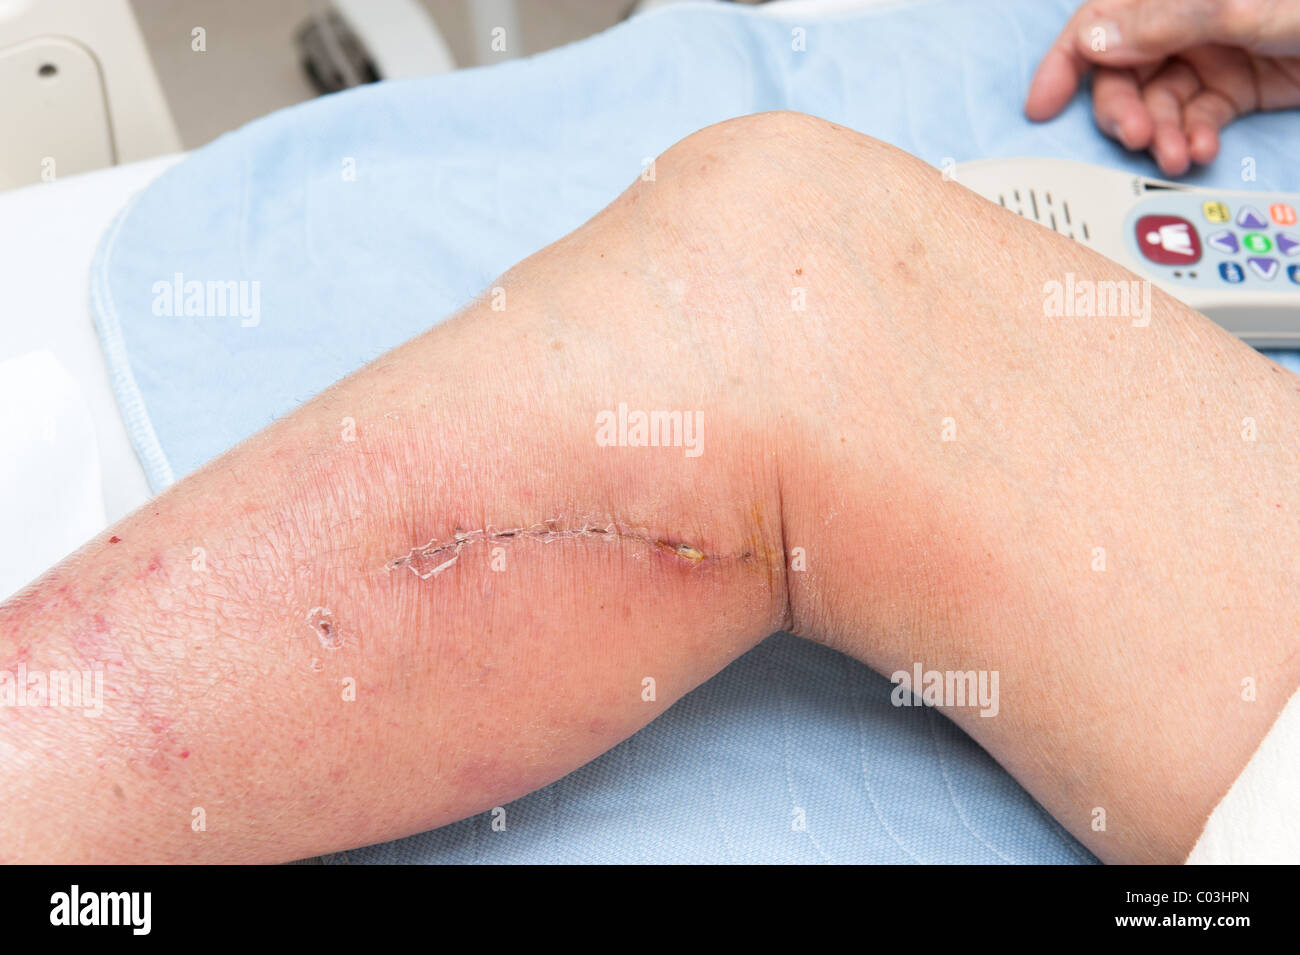 An elderly woman with an infected incision shows puss leaking out the end. Stock Photo